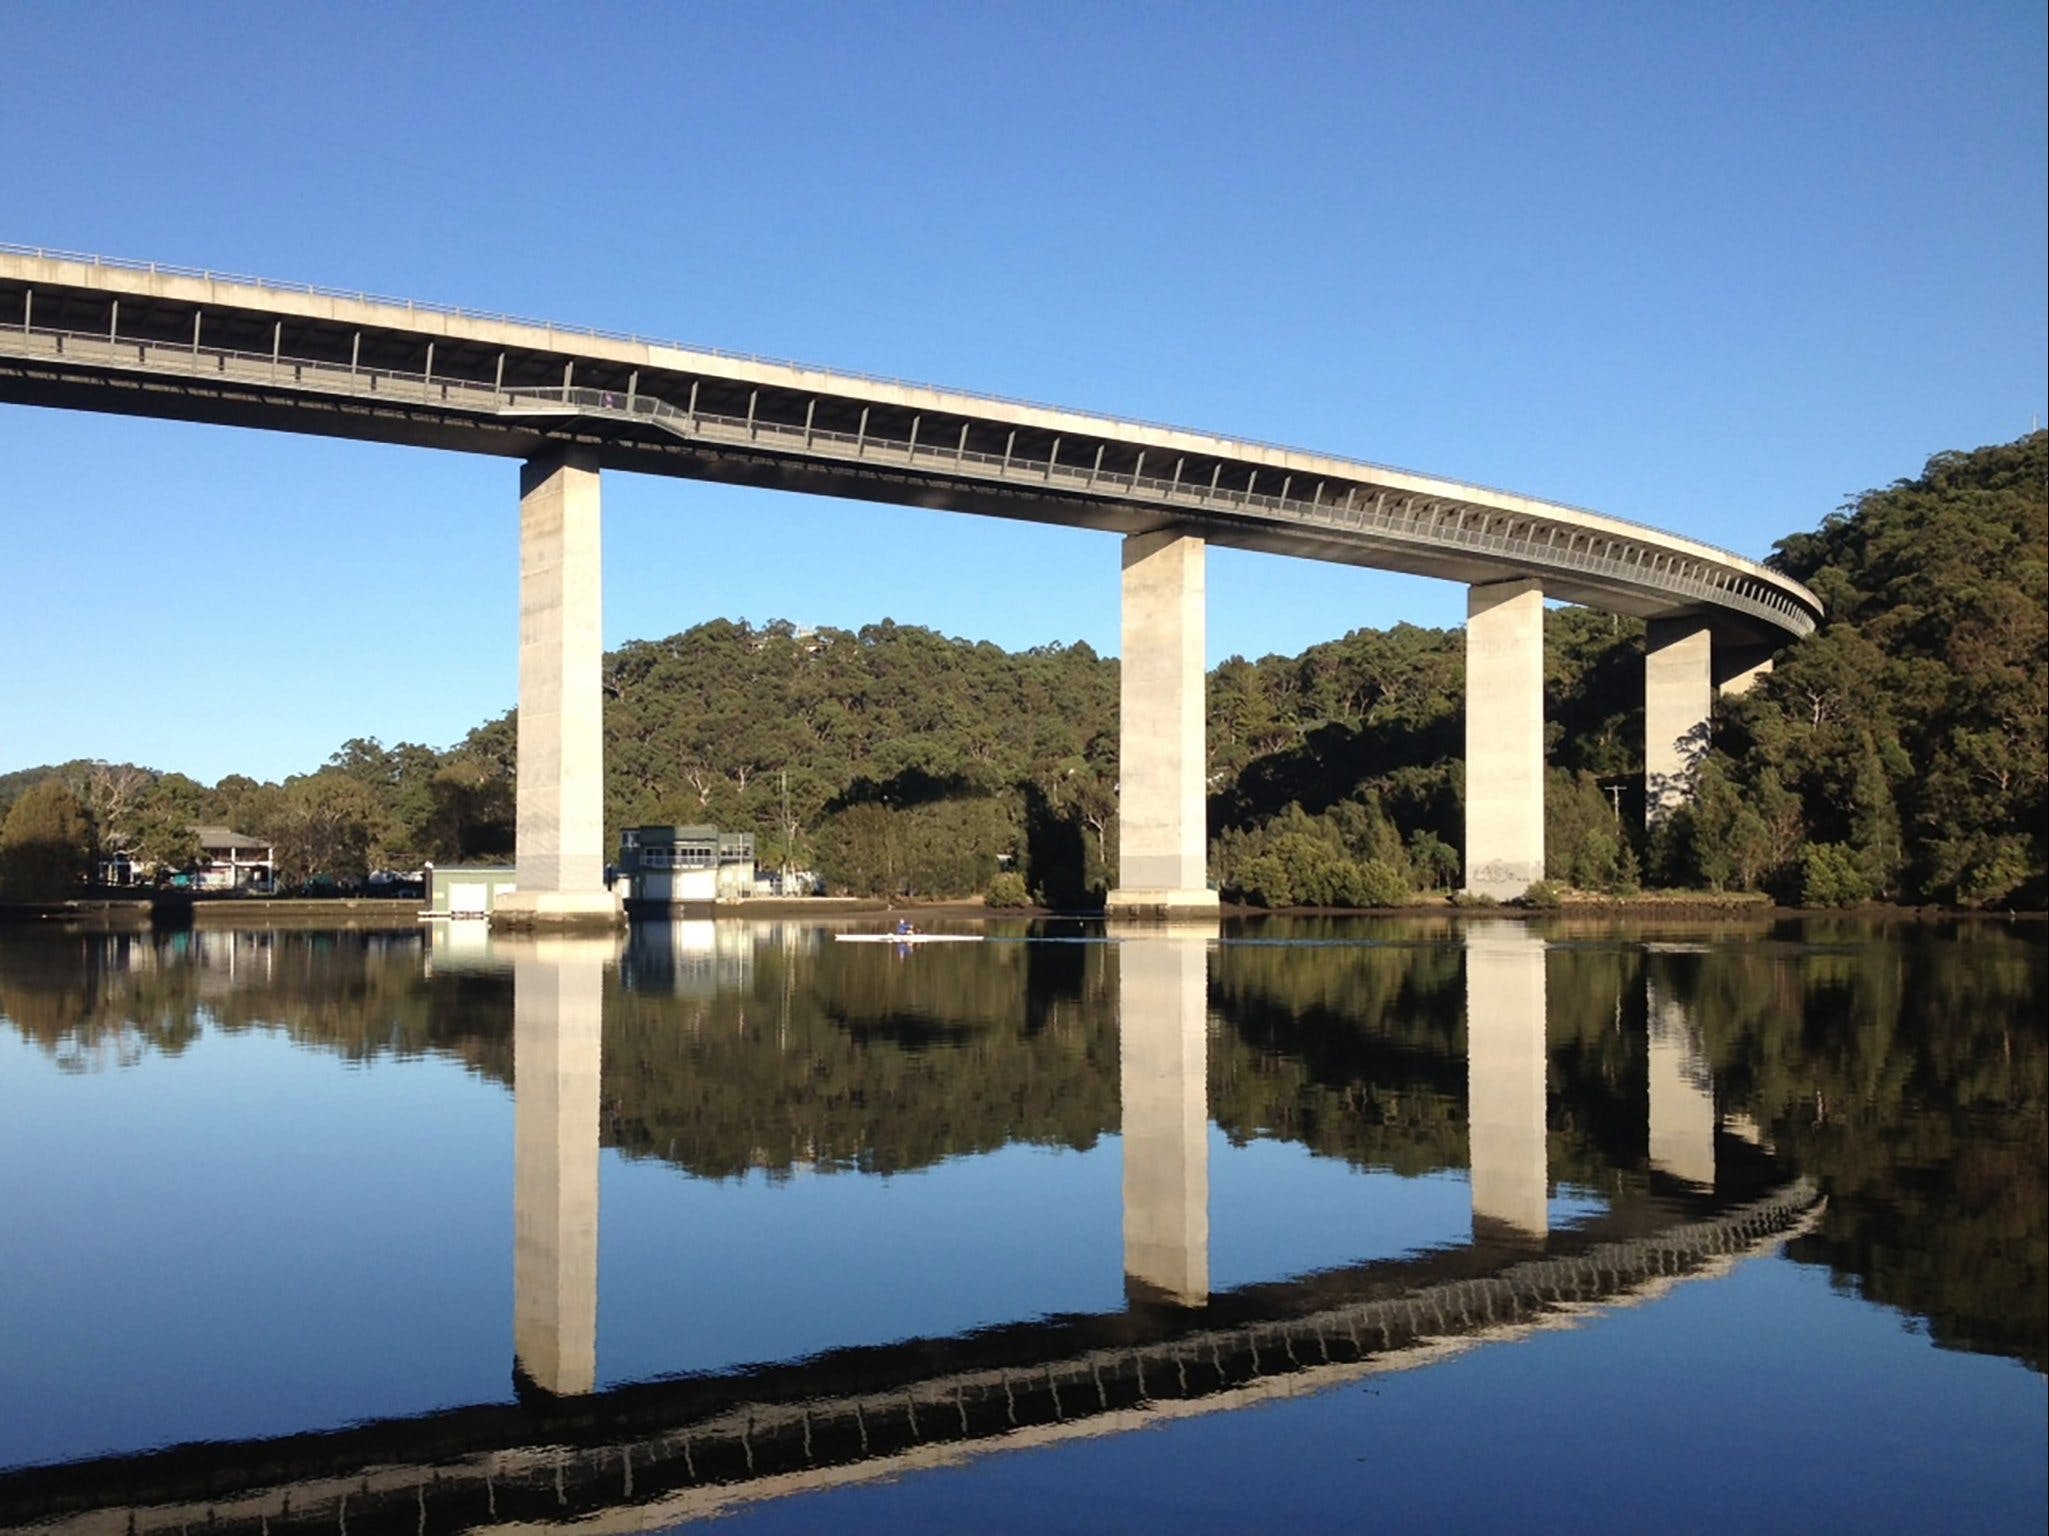 Woronora River - Find Attractions